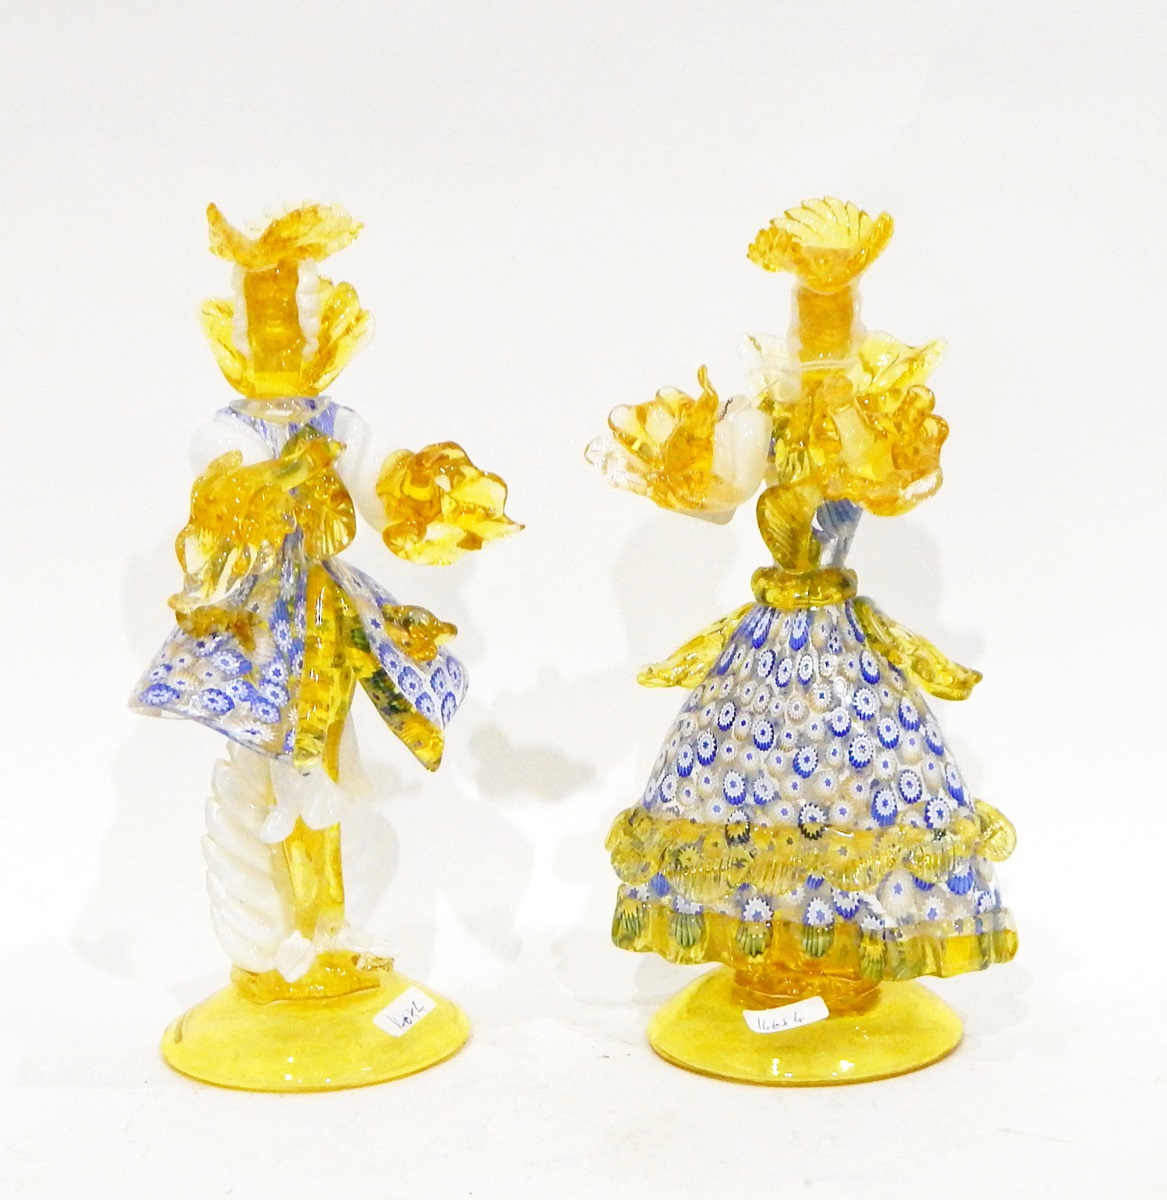 Pair of Murano glass figures of a gentleman and lady in elaborate yellow costumes, - Image 4 of 4